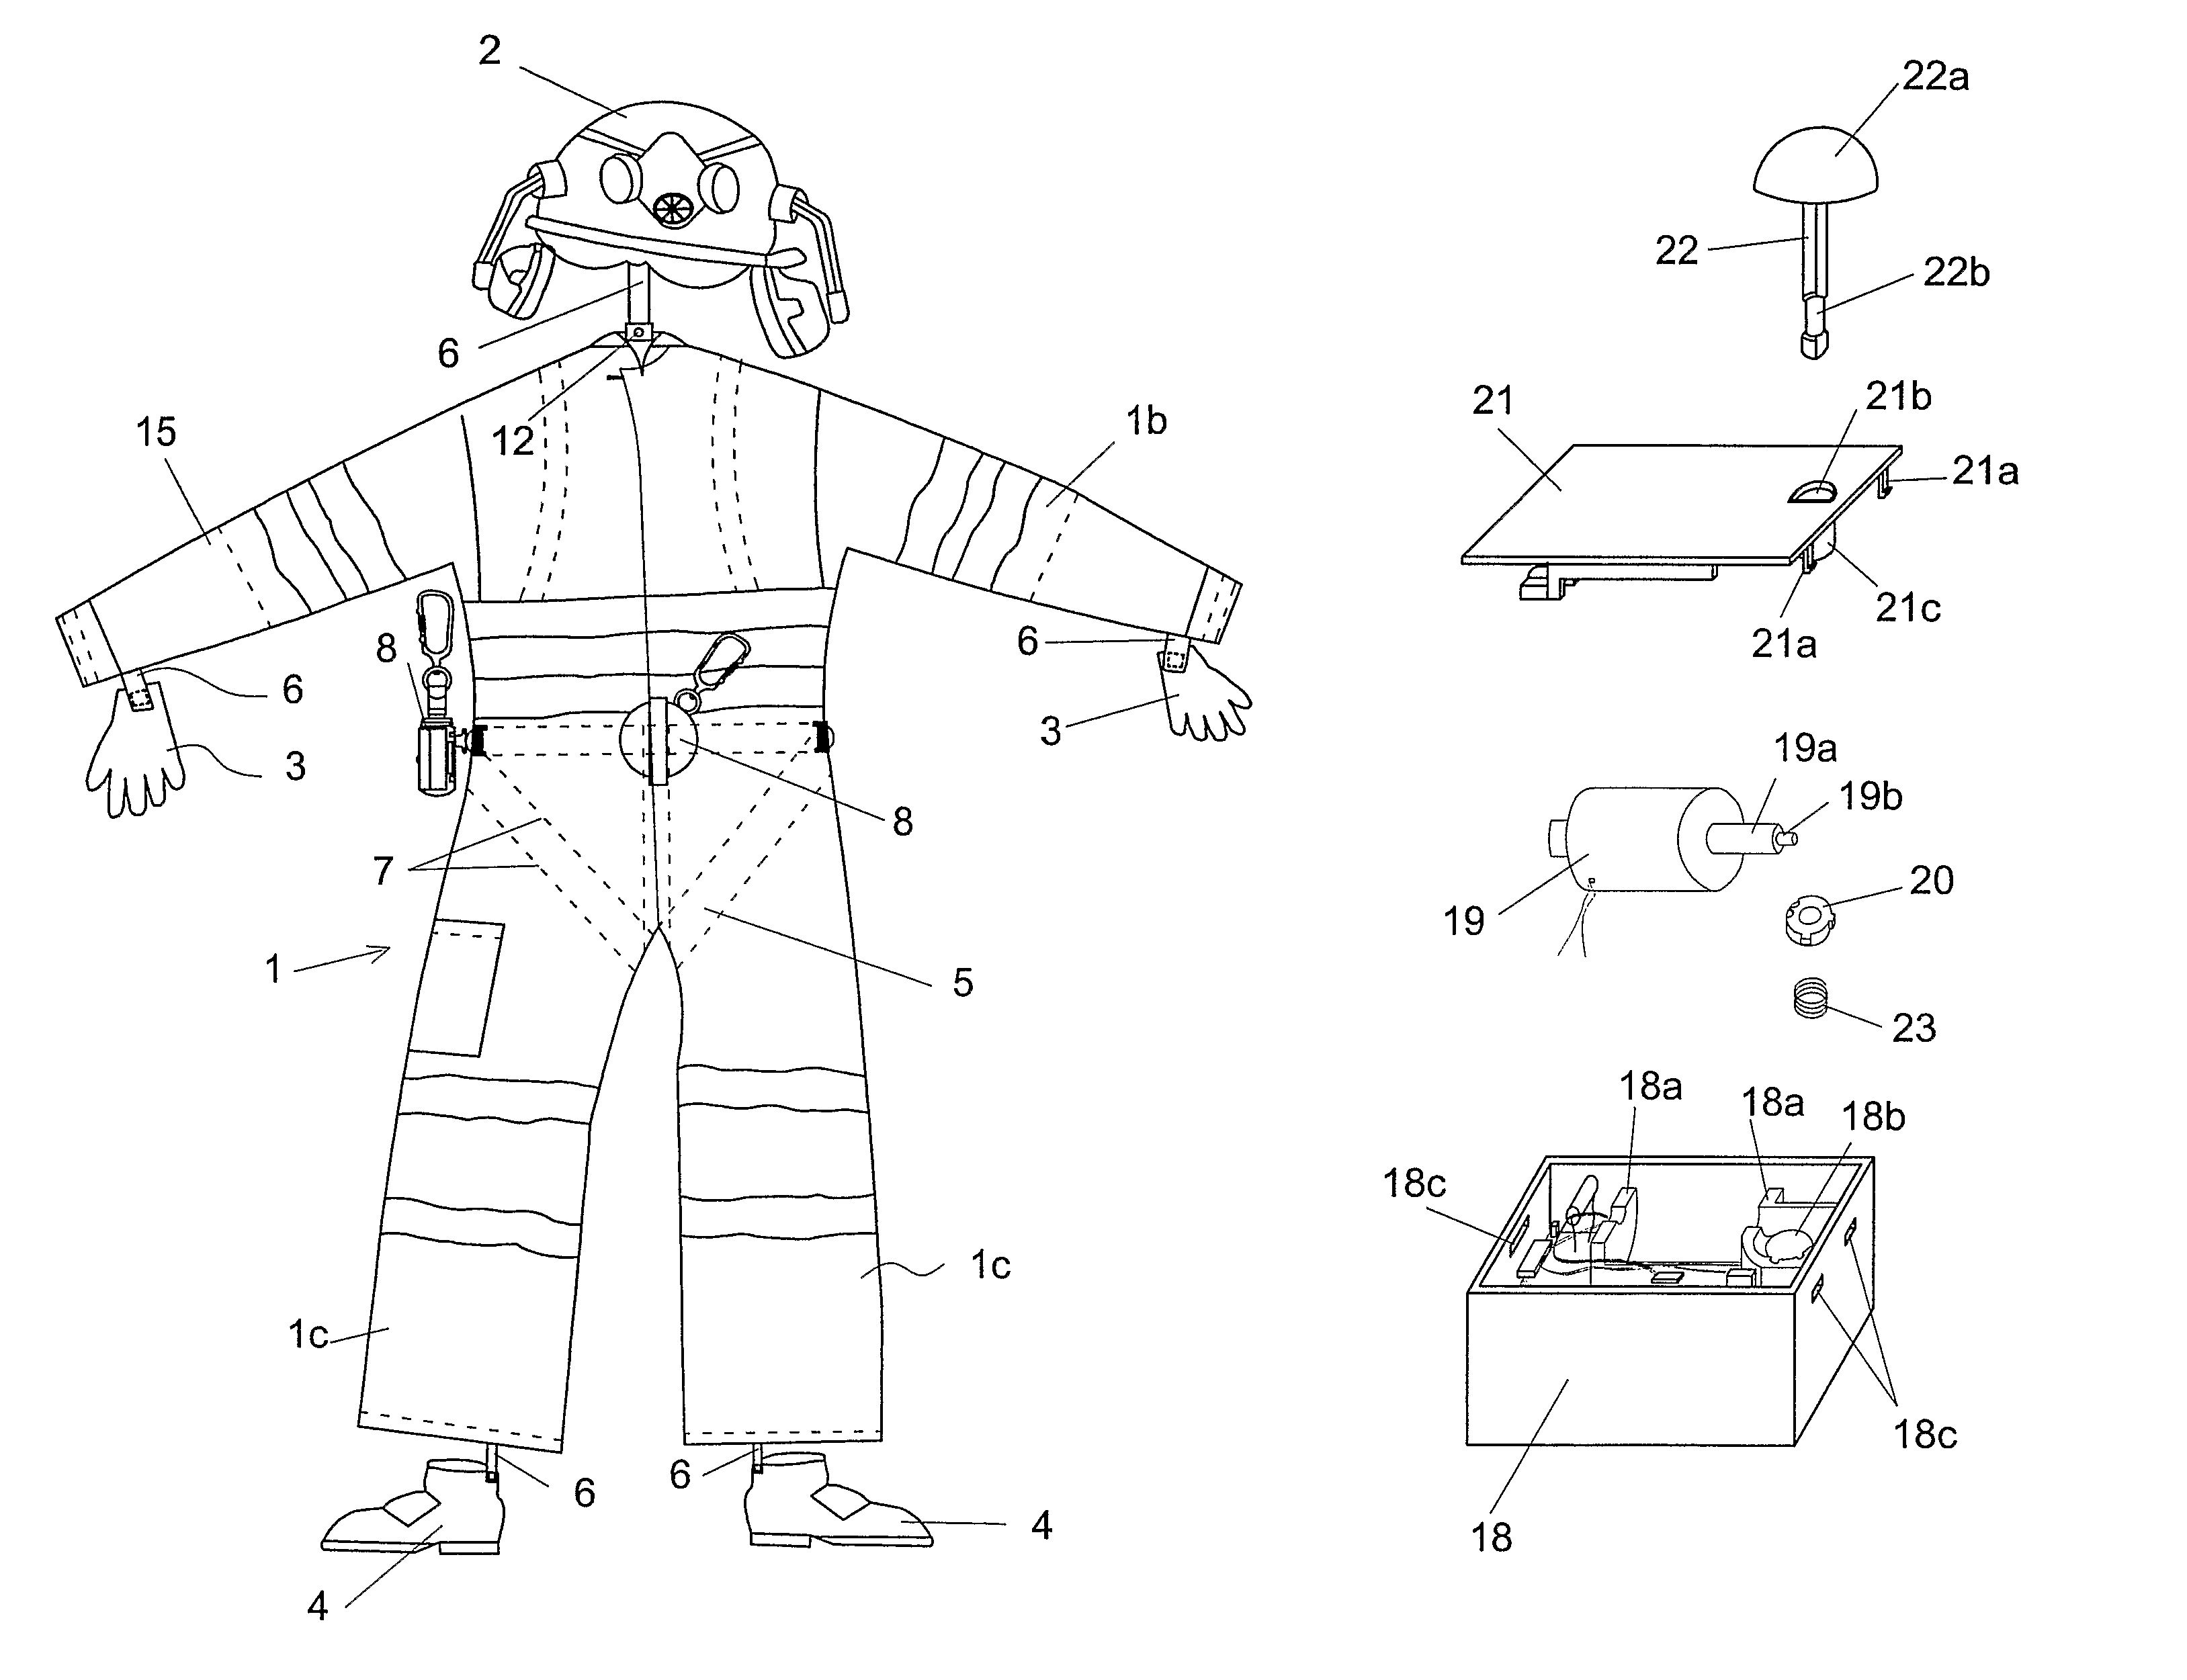 Combined protective garment and safety harness with detachable protective devices